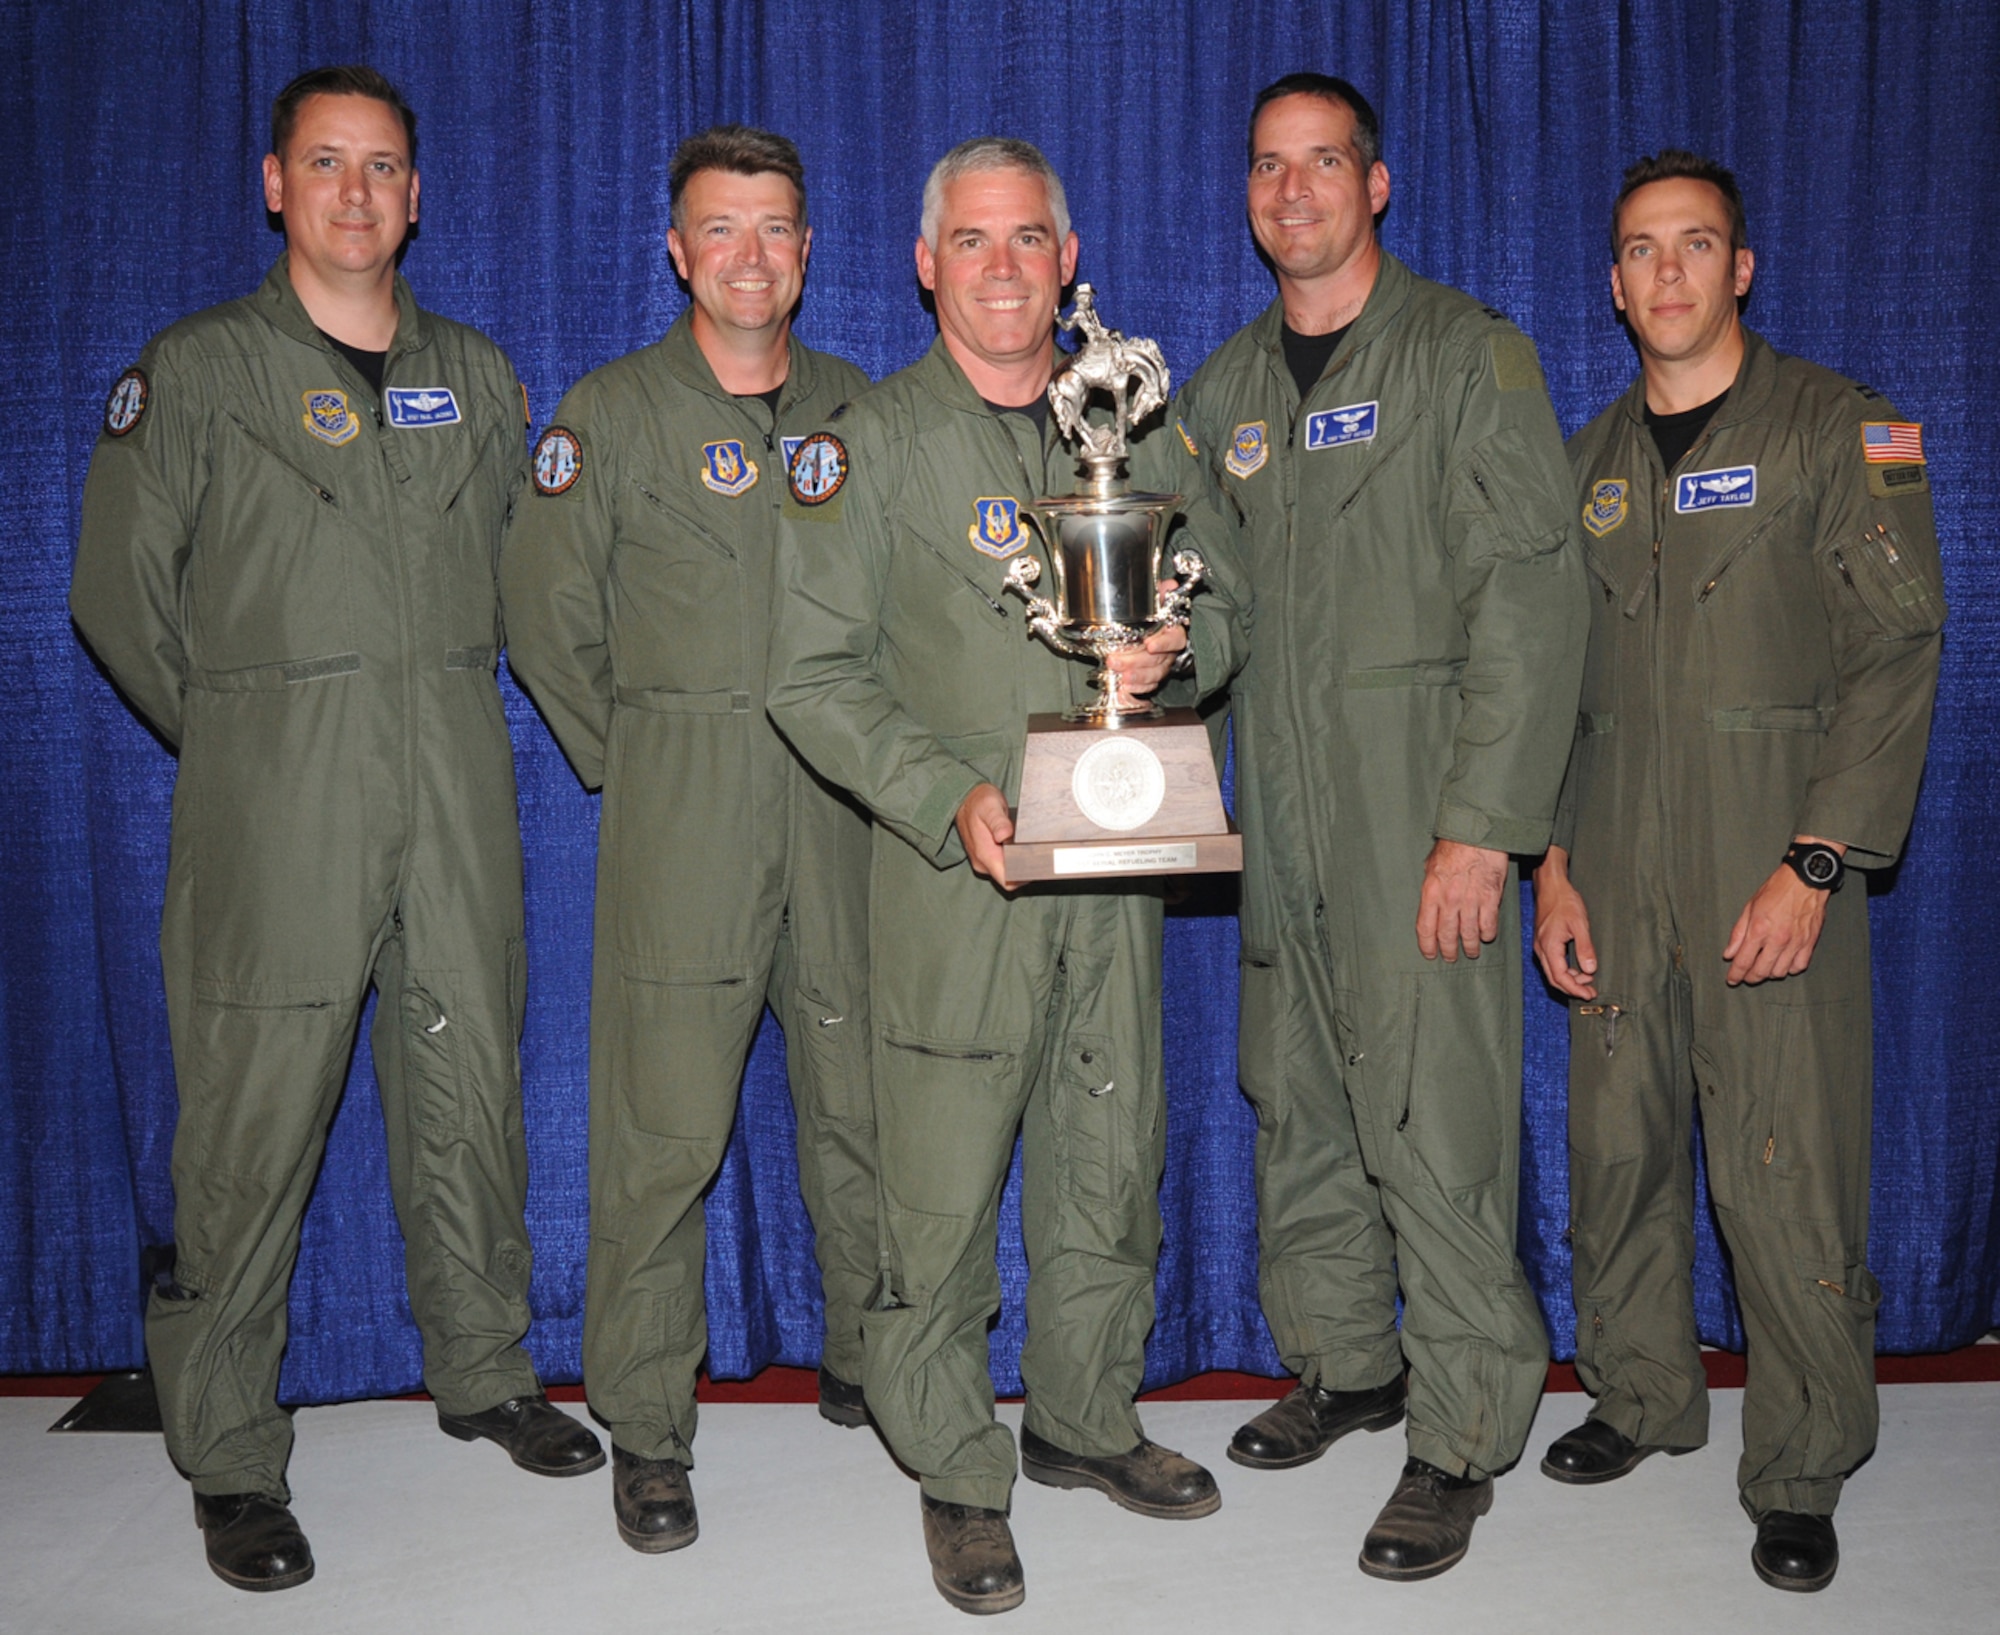 Lt. Col. John Wood, a KC-135 Stratotanker pilot, holds the trophy for Best Aerial Refueling Team at Air Mobility Rodeo 2009 following an awards ceremony at McChord Air Force Base, Wash., July 24, 2009. Colonel Wood and KC-135 boom operator Senior Master Sgt. John Wallman, to Colonel Wood's right, are Air Force reservists in the 931st Air Refueling Group at McConnell AFB, Kan. They teamed up with Regular Air Force Airmen from McConnell's 22nd Air Refueling Wing to win the team award. (U.S. Air Force photo/Tech. Sgt. Chyrece Campbell)

